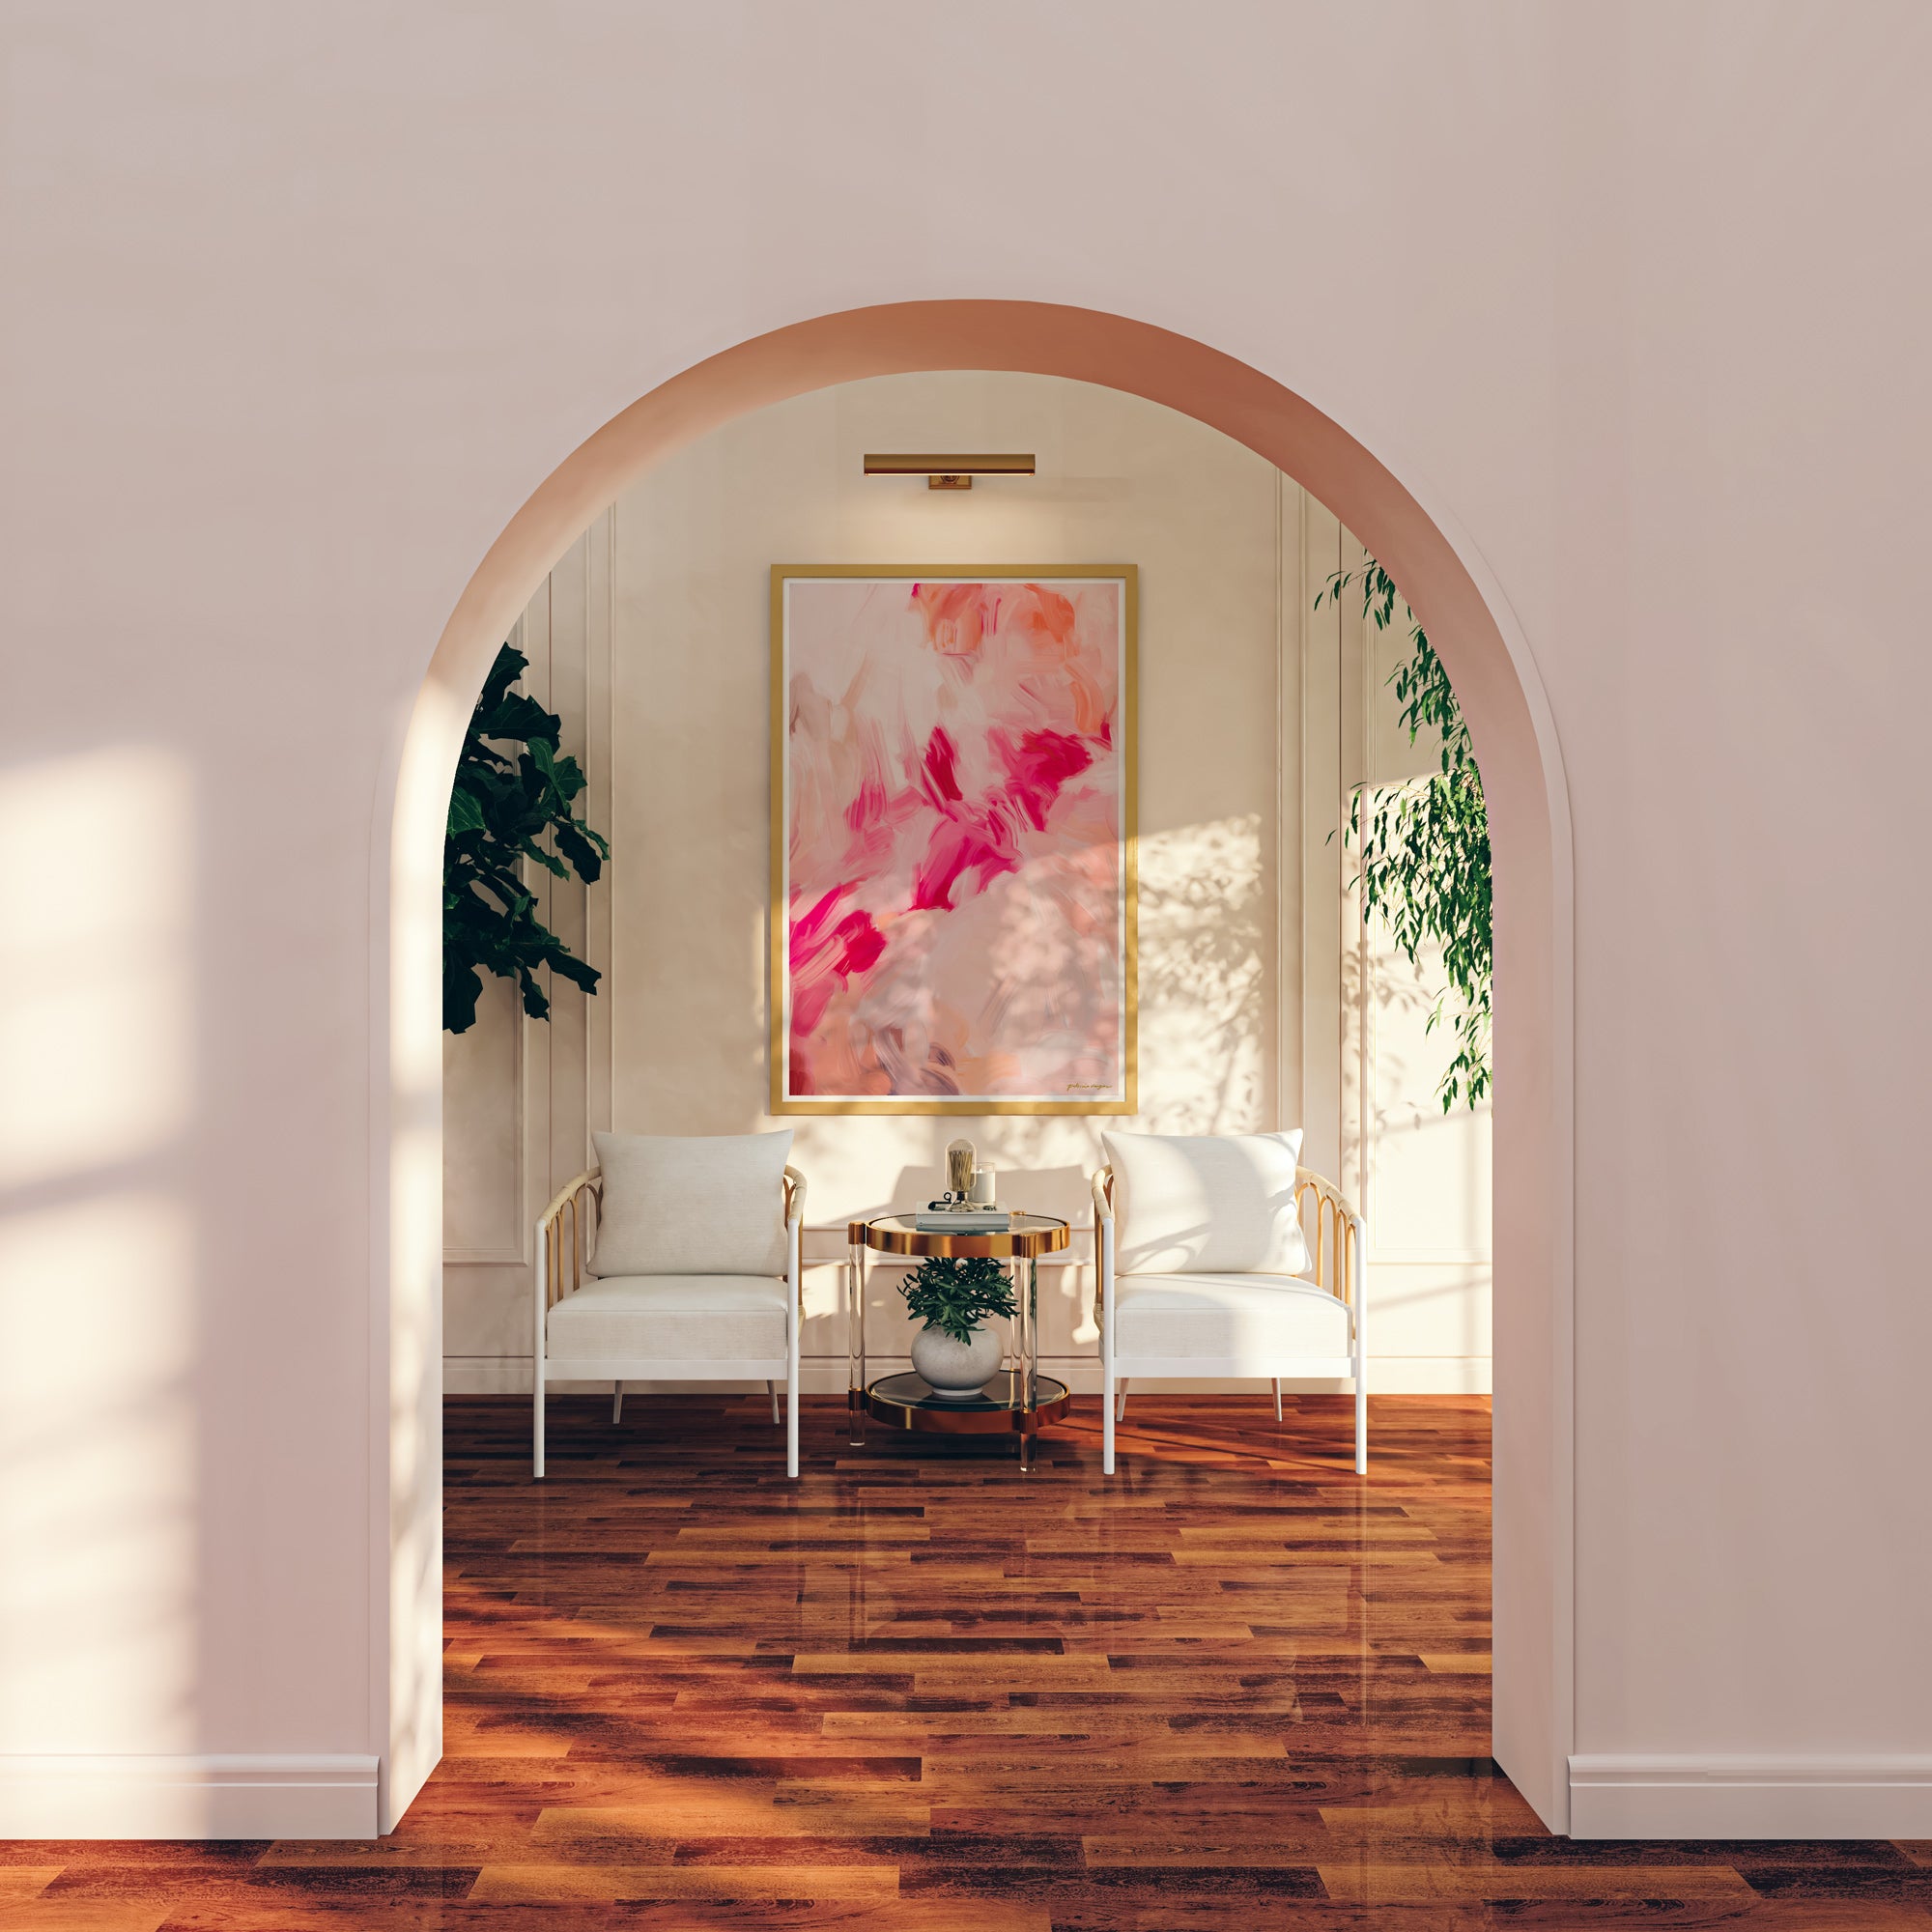 Florie, pink and orange colorful abstract wall art print by Parima Studio. Stunning vertical art in pink archway.